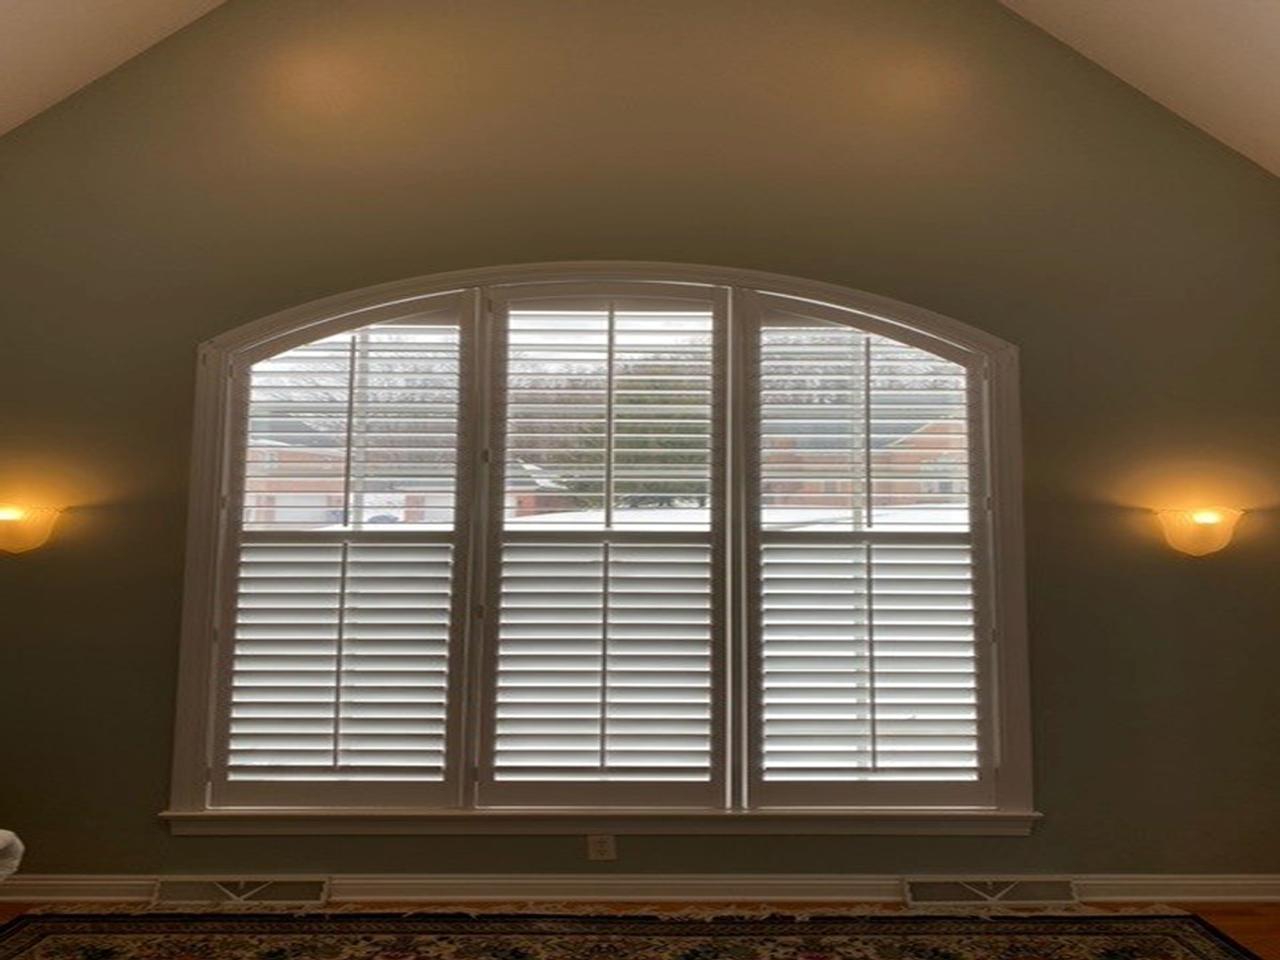 Arched windows with shutters